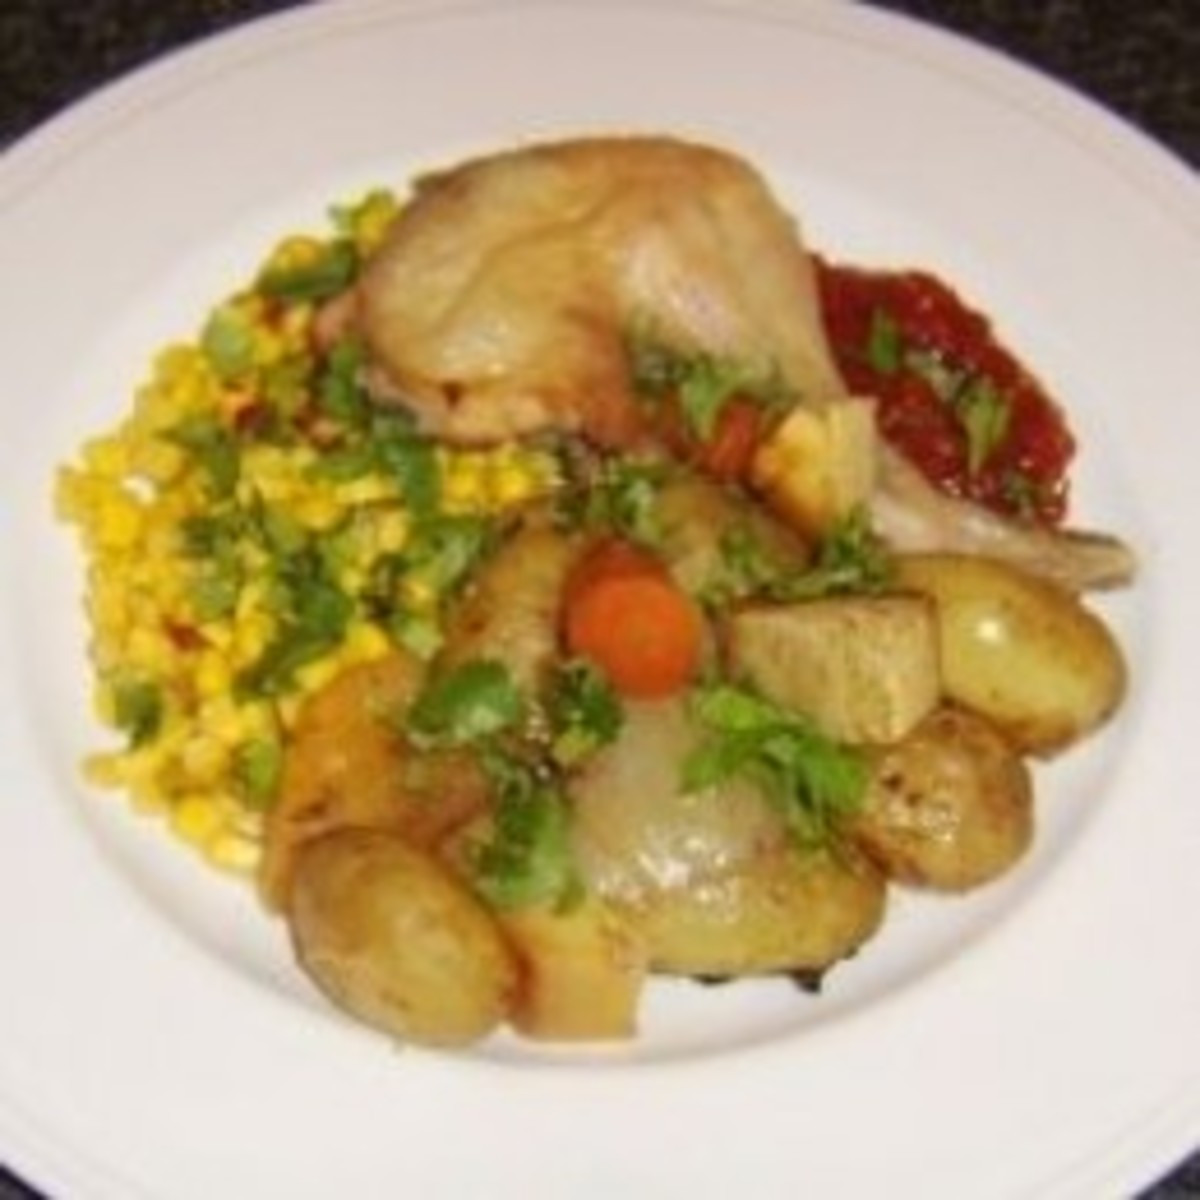 Awesome Roast Chicken Recipes